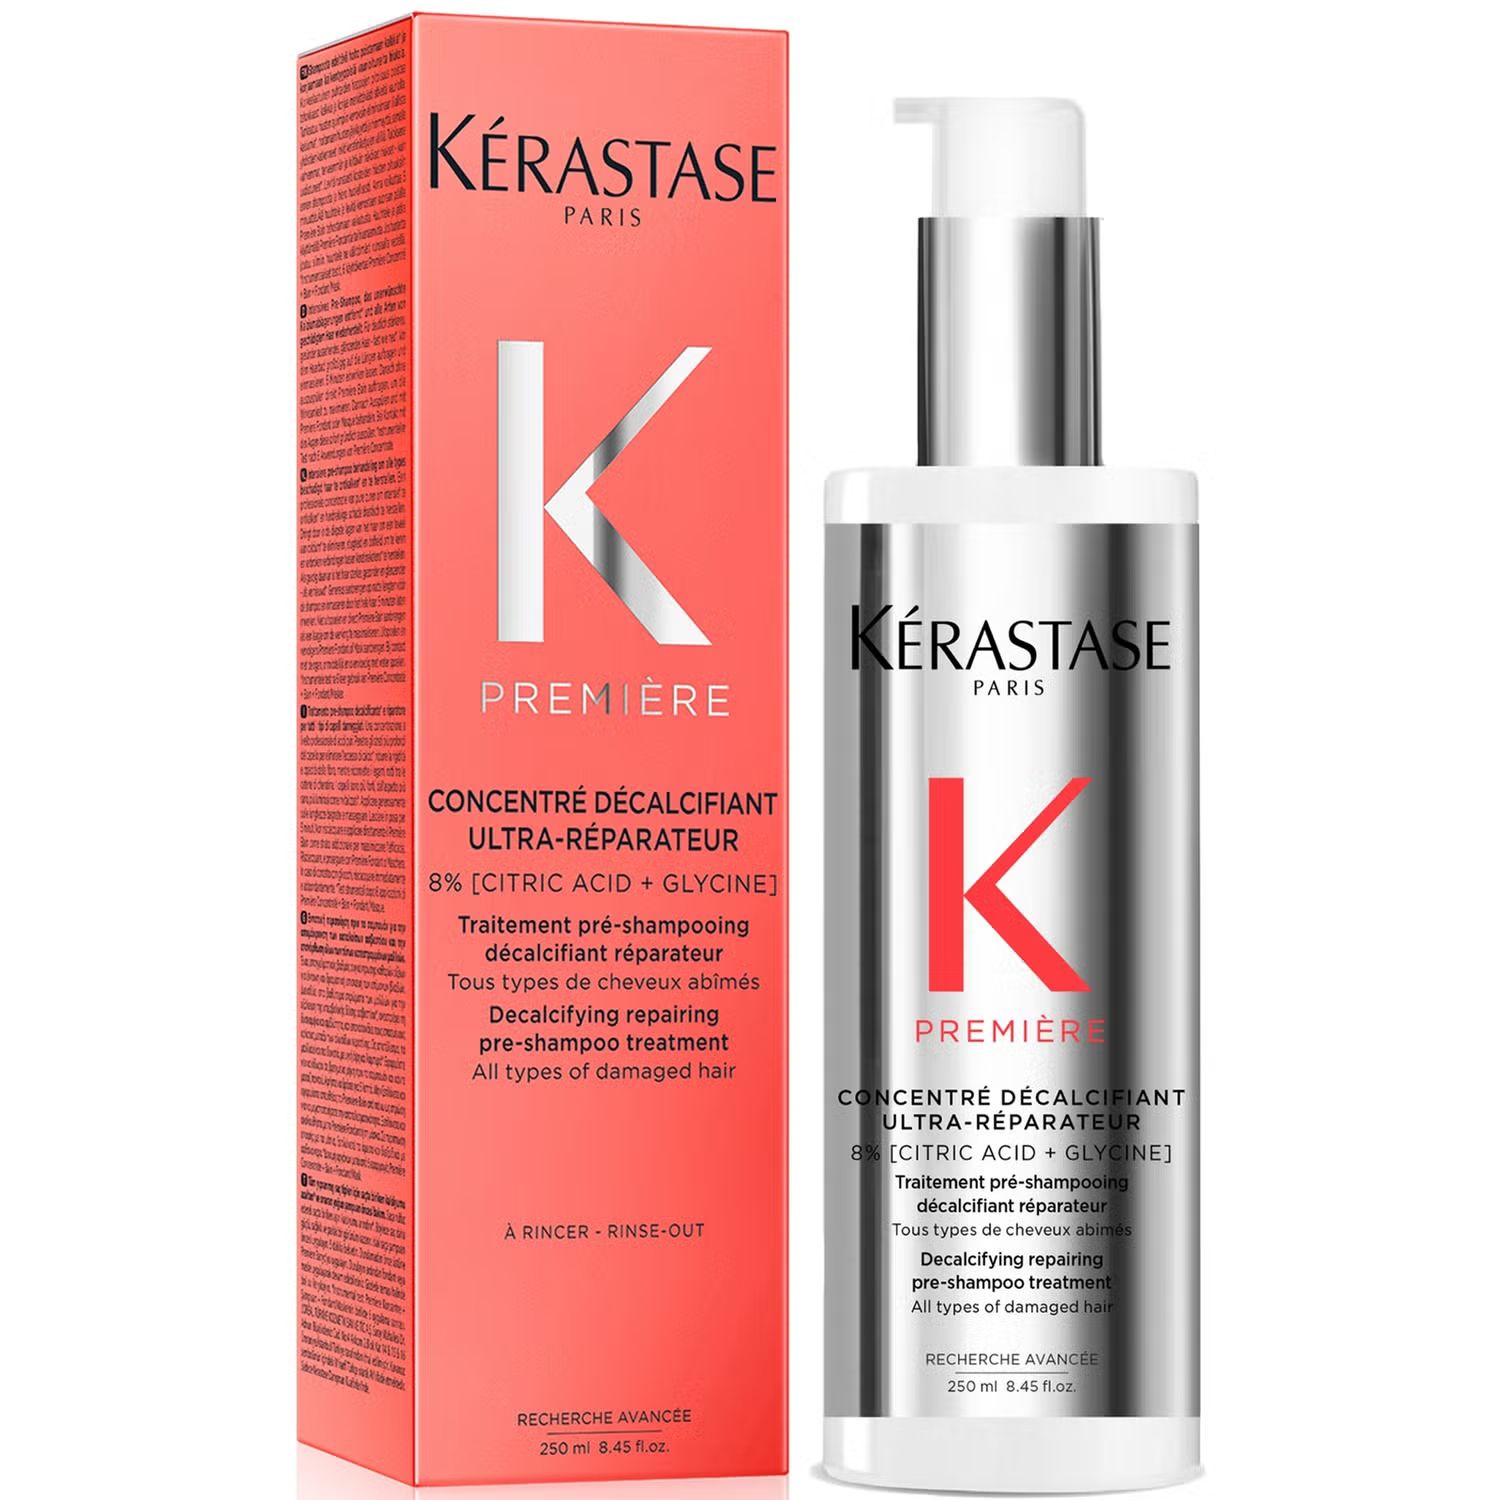 Kérastase Première Decalcifying Repairing Pre-Shampoo Treatment for Damaged Hair with Pure Citr... | Look Fantastic (UK)